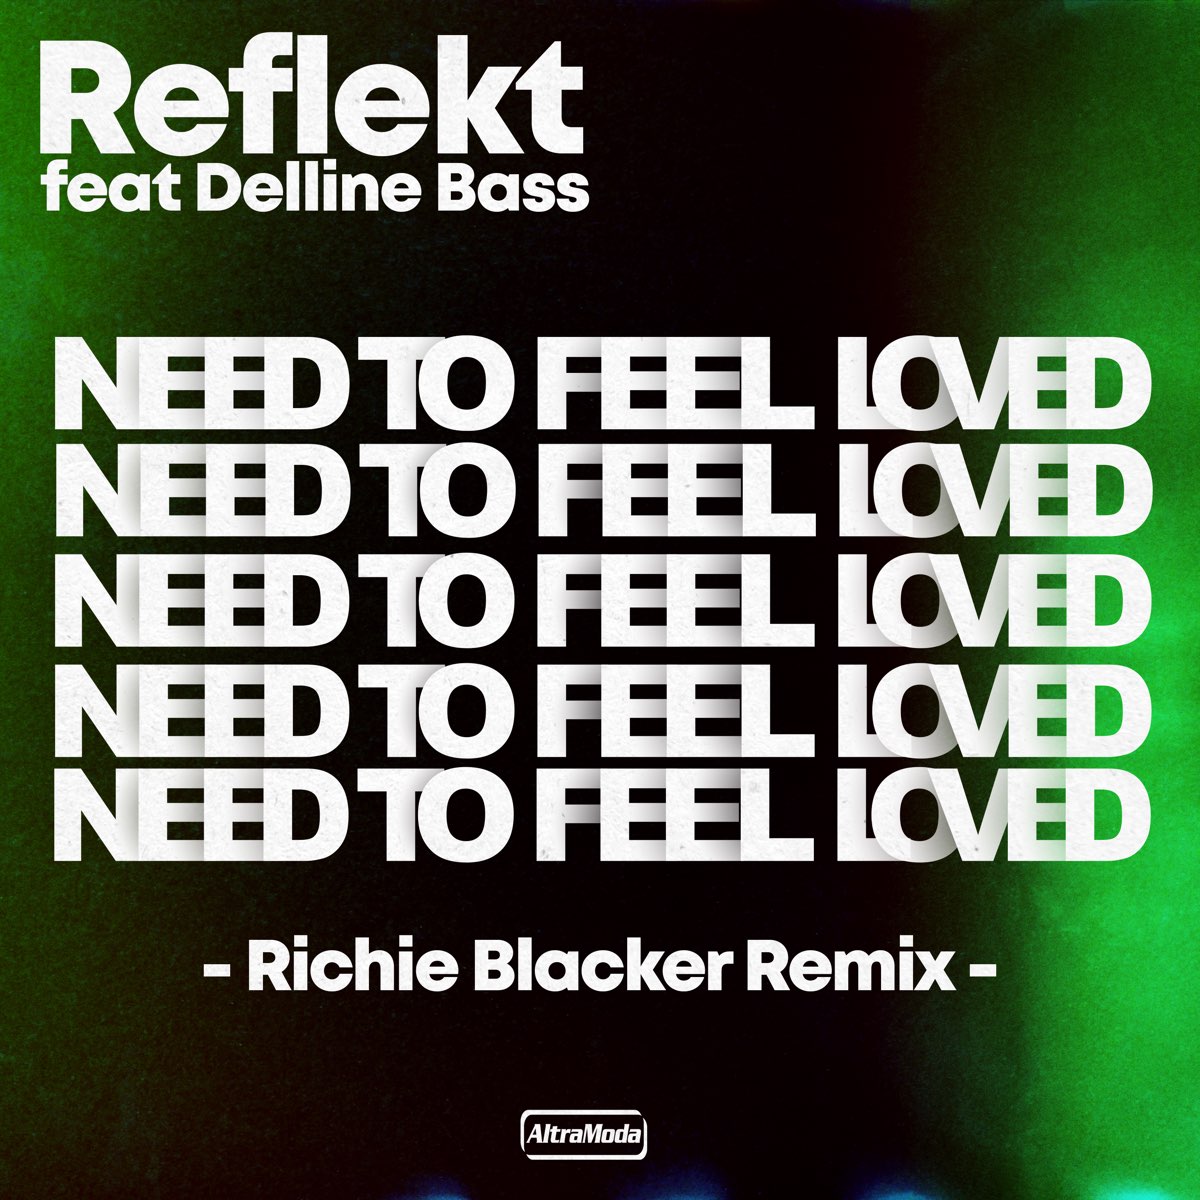 Need to feel loved feat delline bass. Reflekt ft. Delline Bass need to feel Loved. Reflekt feat. Delline Bass. Reflekt need to feel Loved. Reflekt feat. Delline Bass - need to feel Loved (Adam k & Soha Vocal Remix).